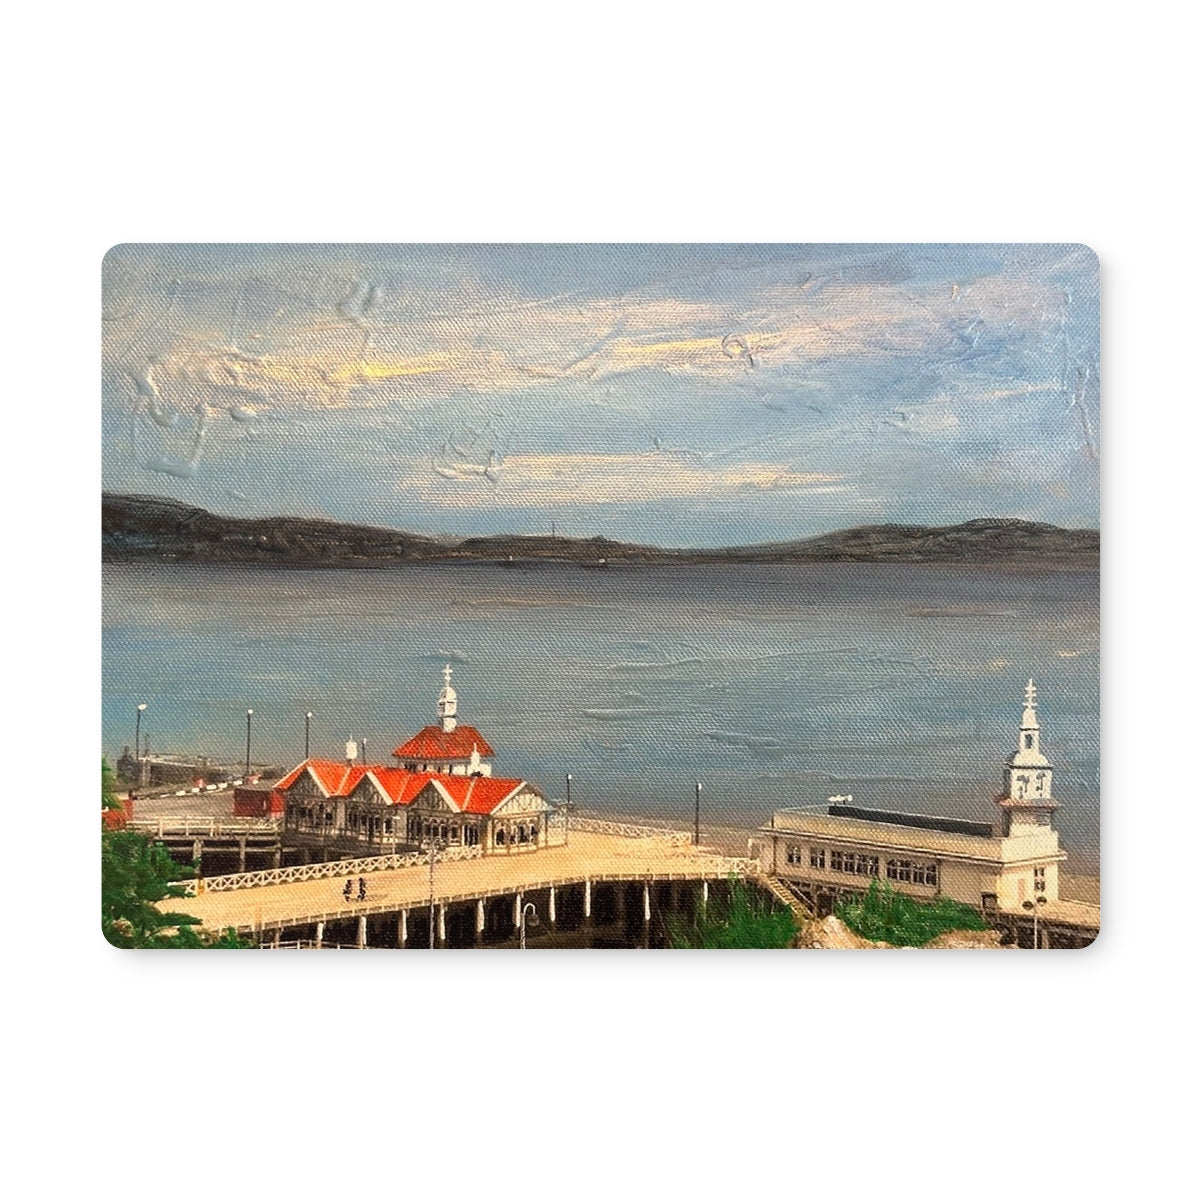 Looking From Dunoon Art Gifts Placemat-Placemats-River Clyde Art Gallery-2 Placemats-Paintings, Prints, Homeware, Art Gifts From Scotland By Scottish Artist Kevin Hunter